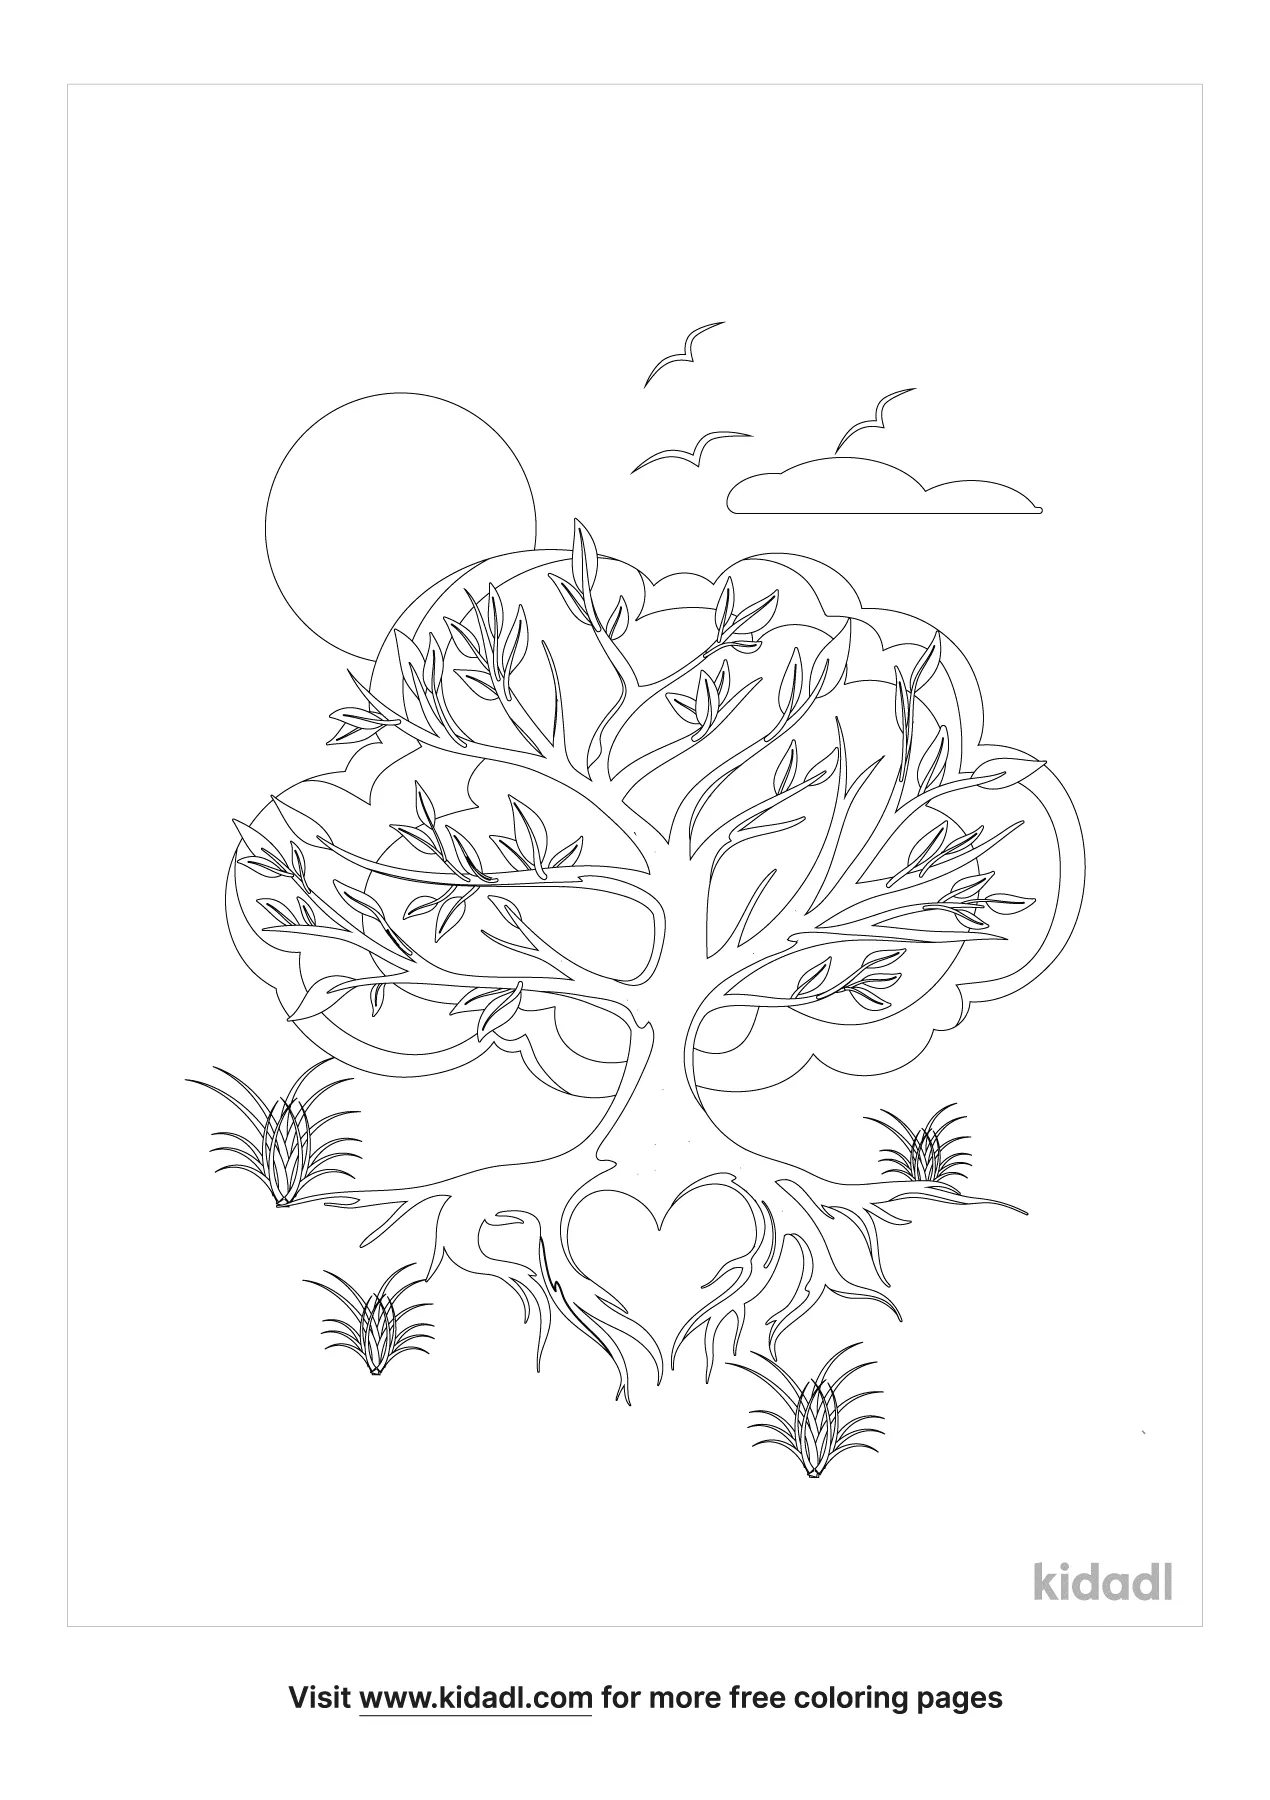 God Made The Trees Coloring Page